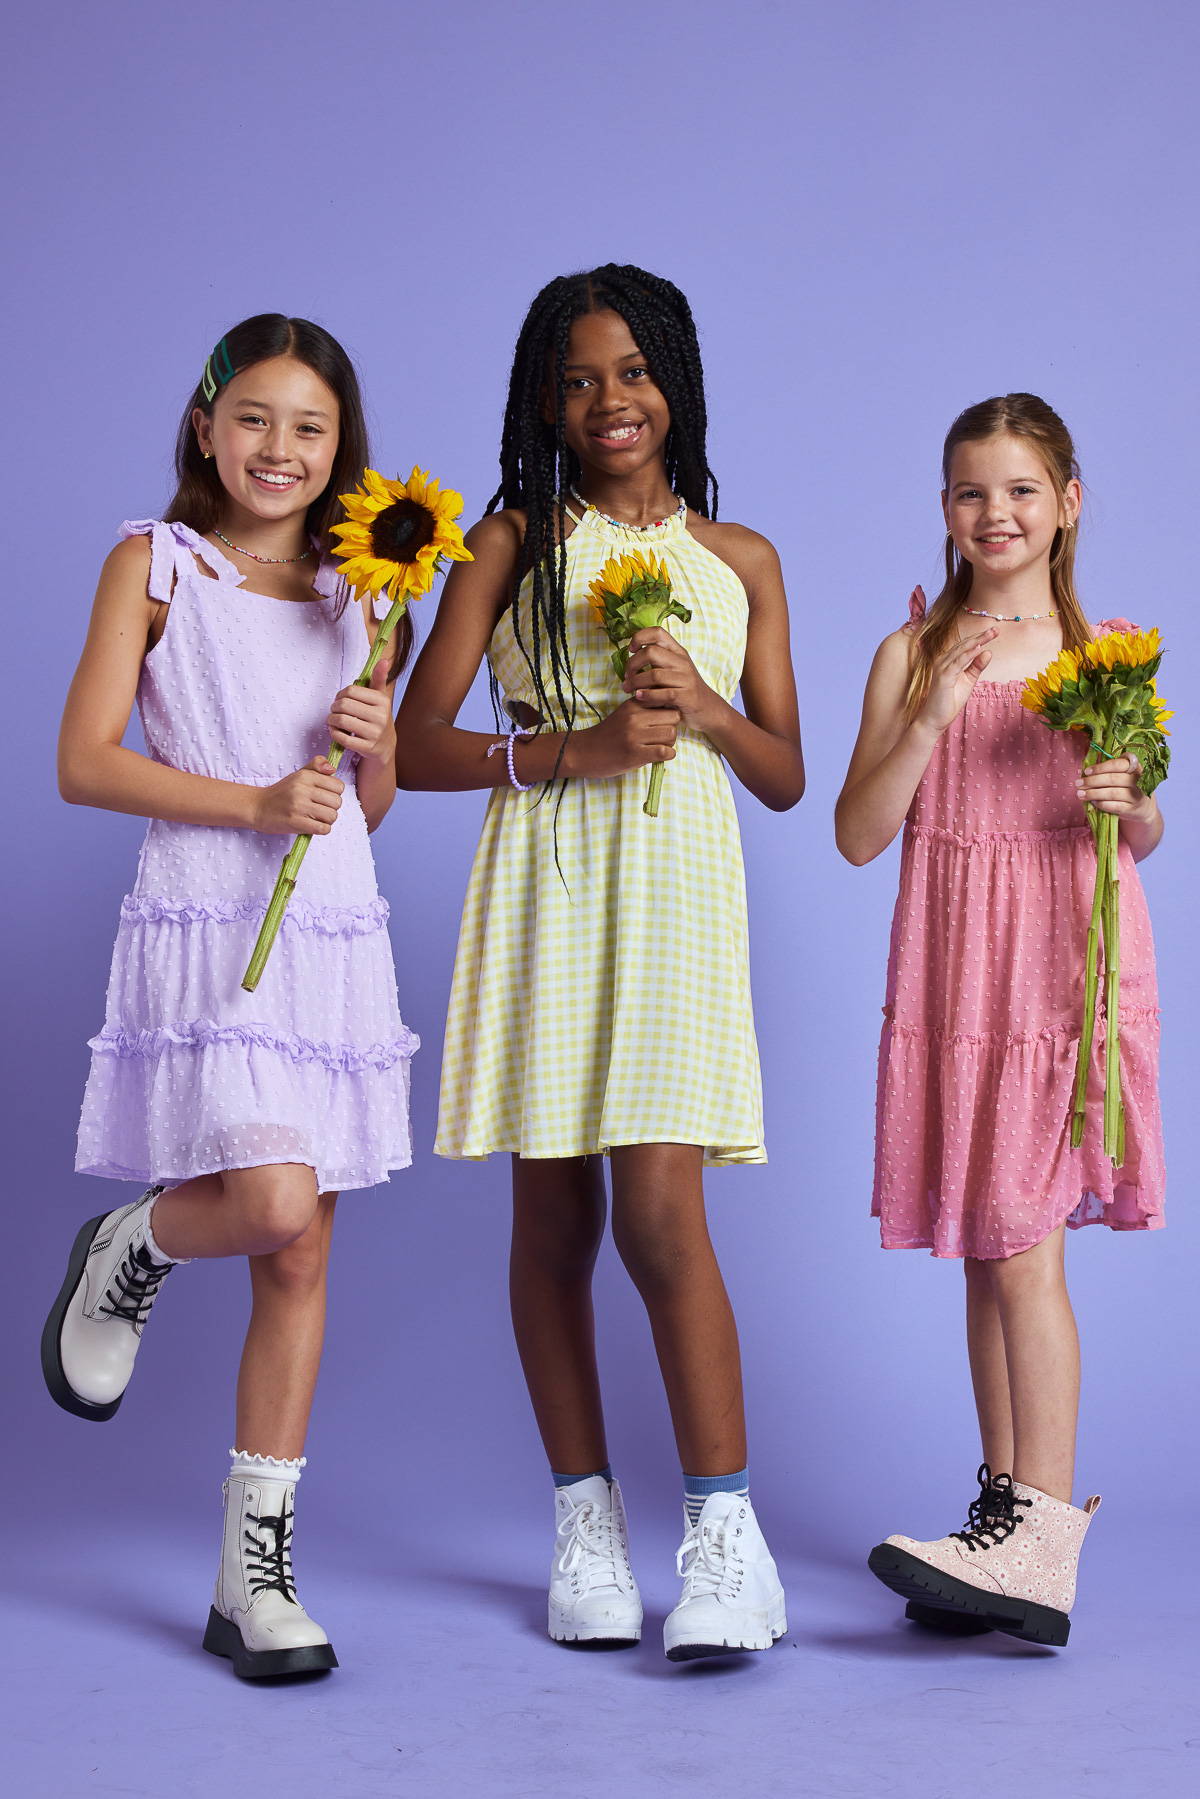 Trixxi Girl, kids collection, three young girls in Trixxi colorful dresses holding sunflowers.